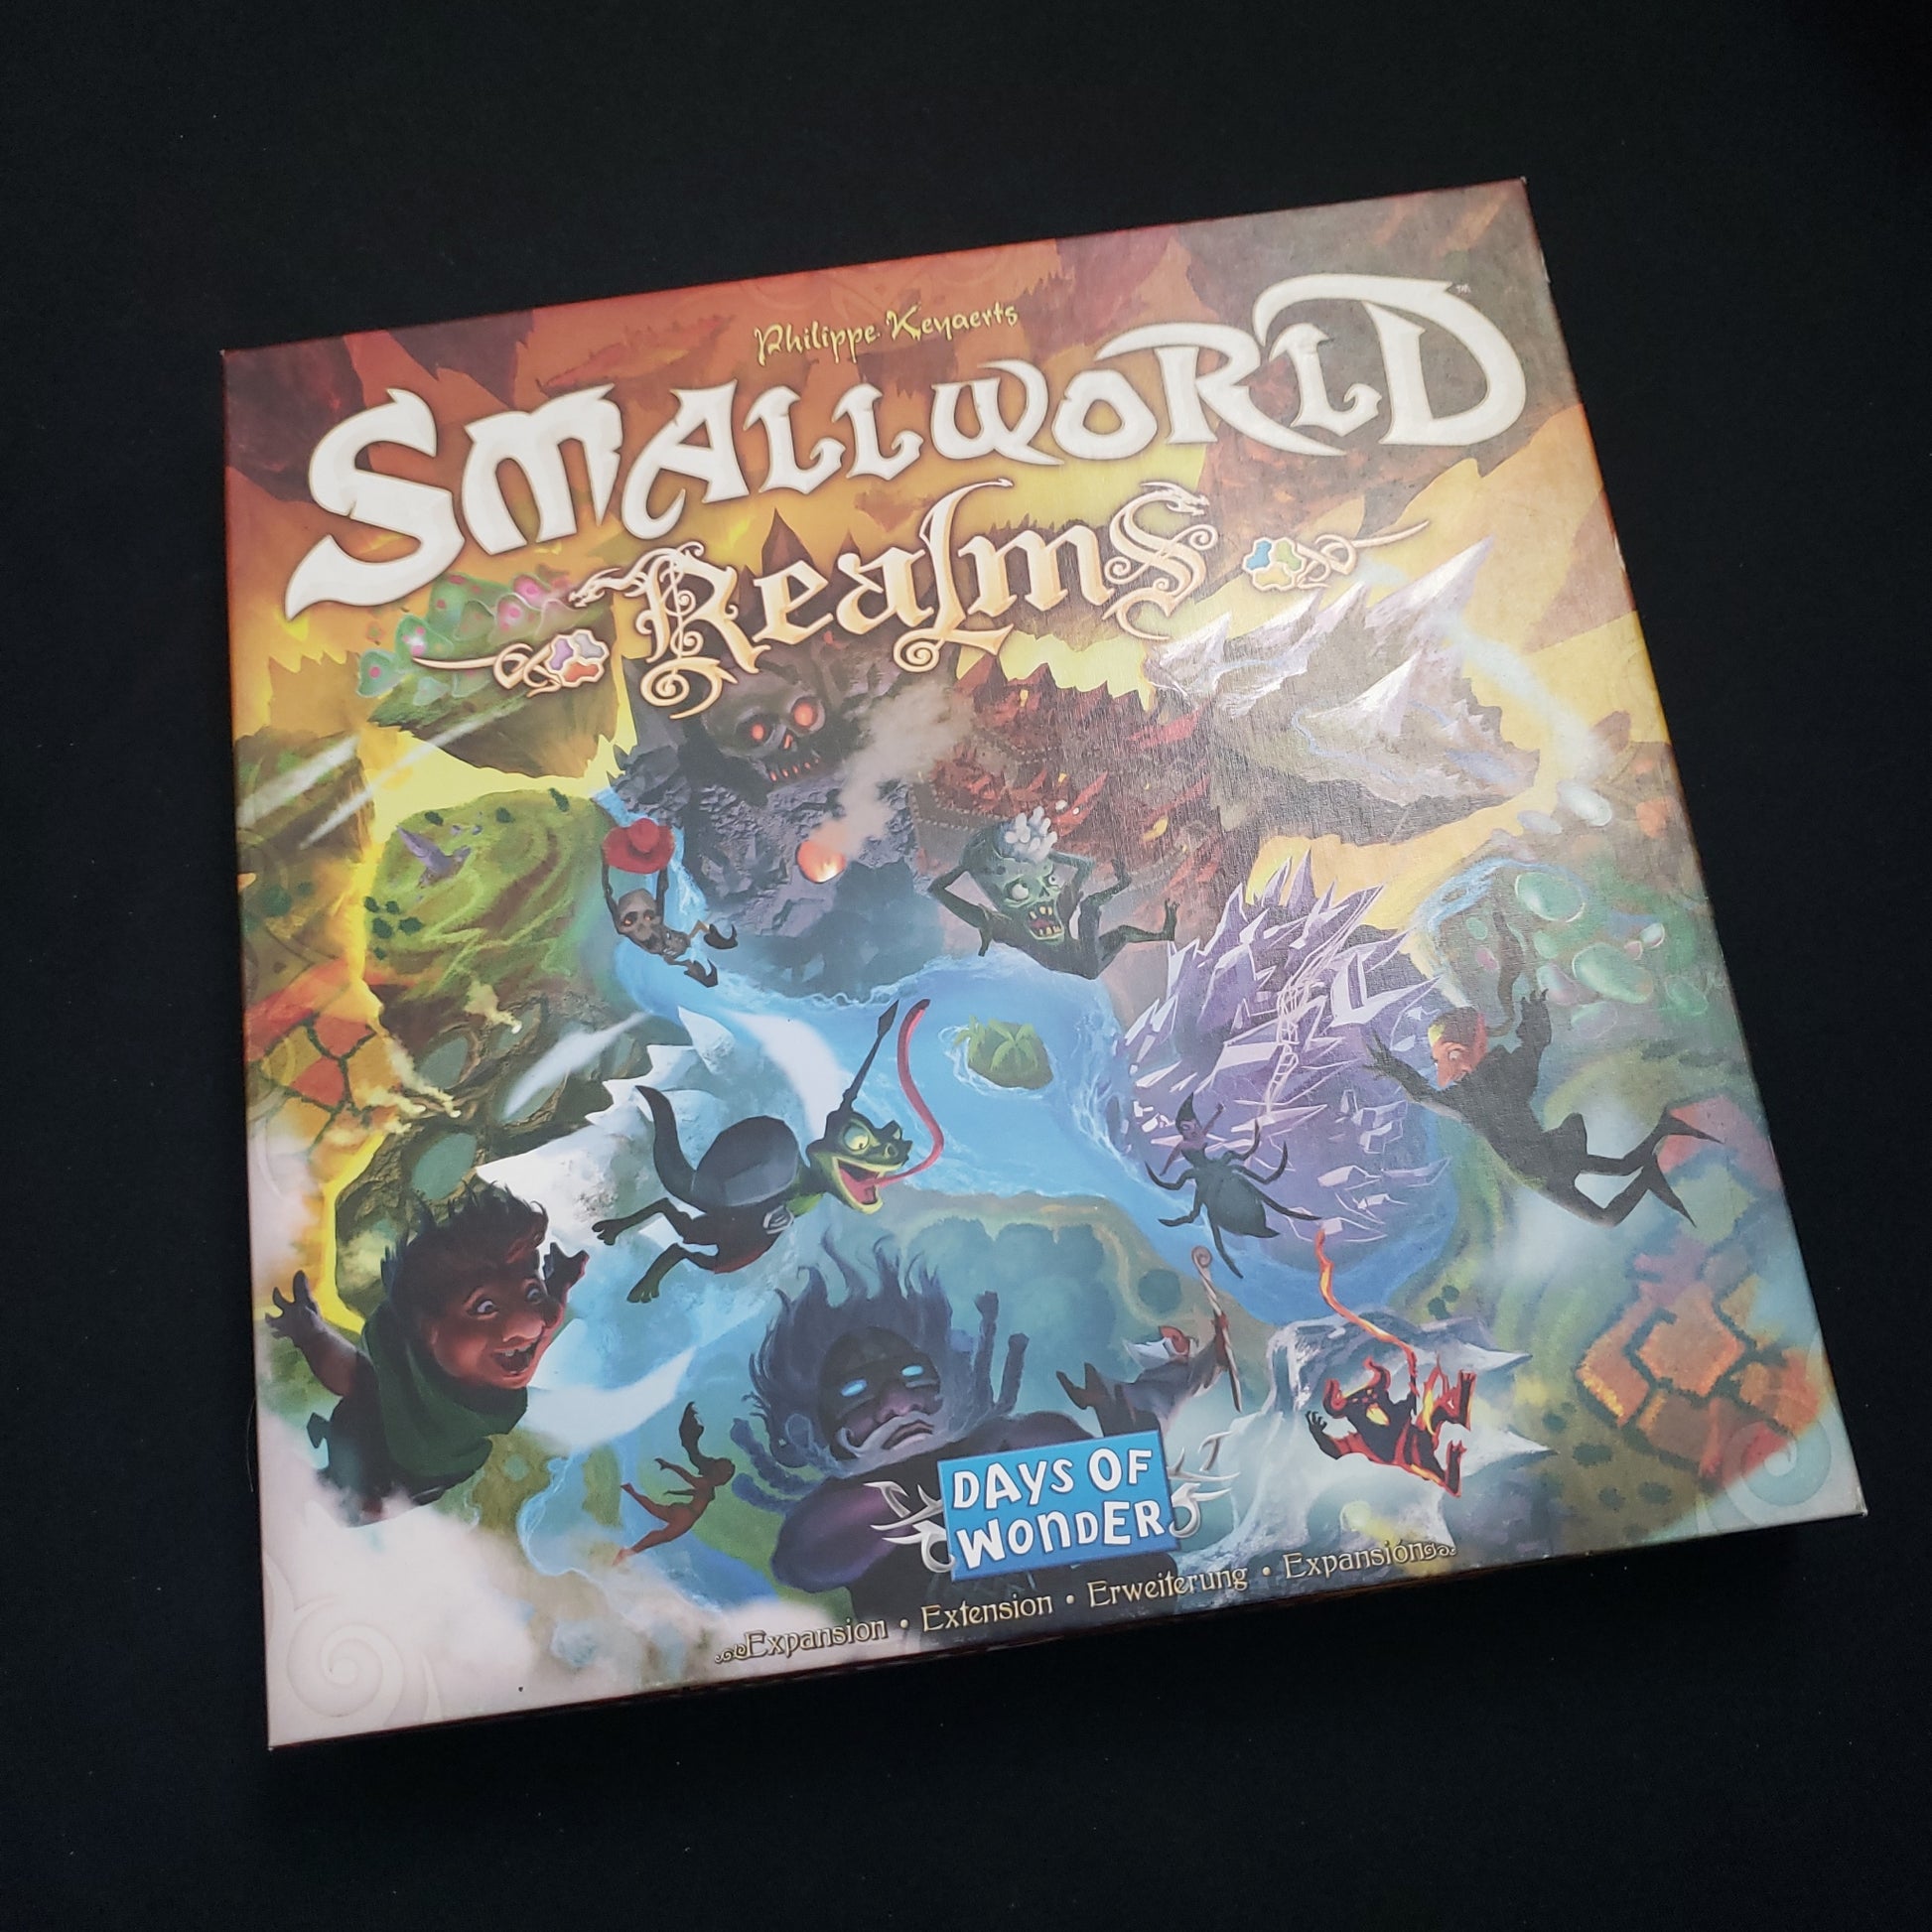 Image shows the front cover of the box of the Realms expansion for the board game Small World